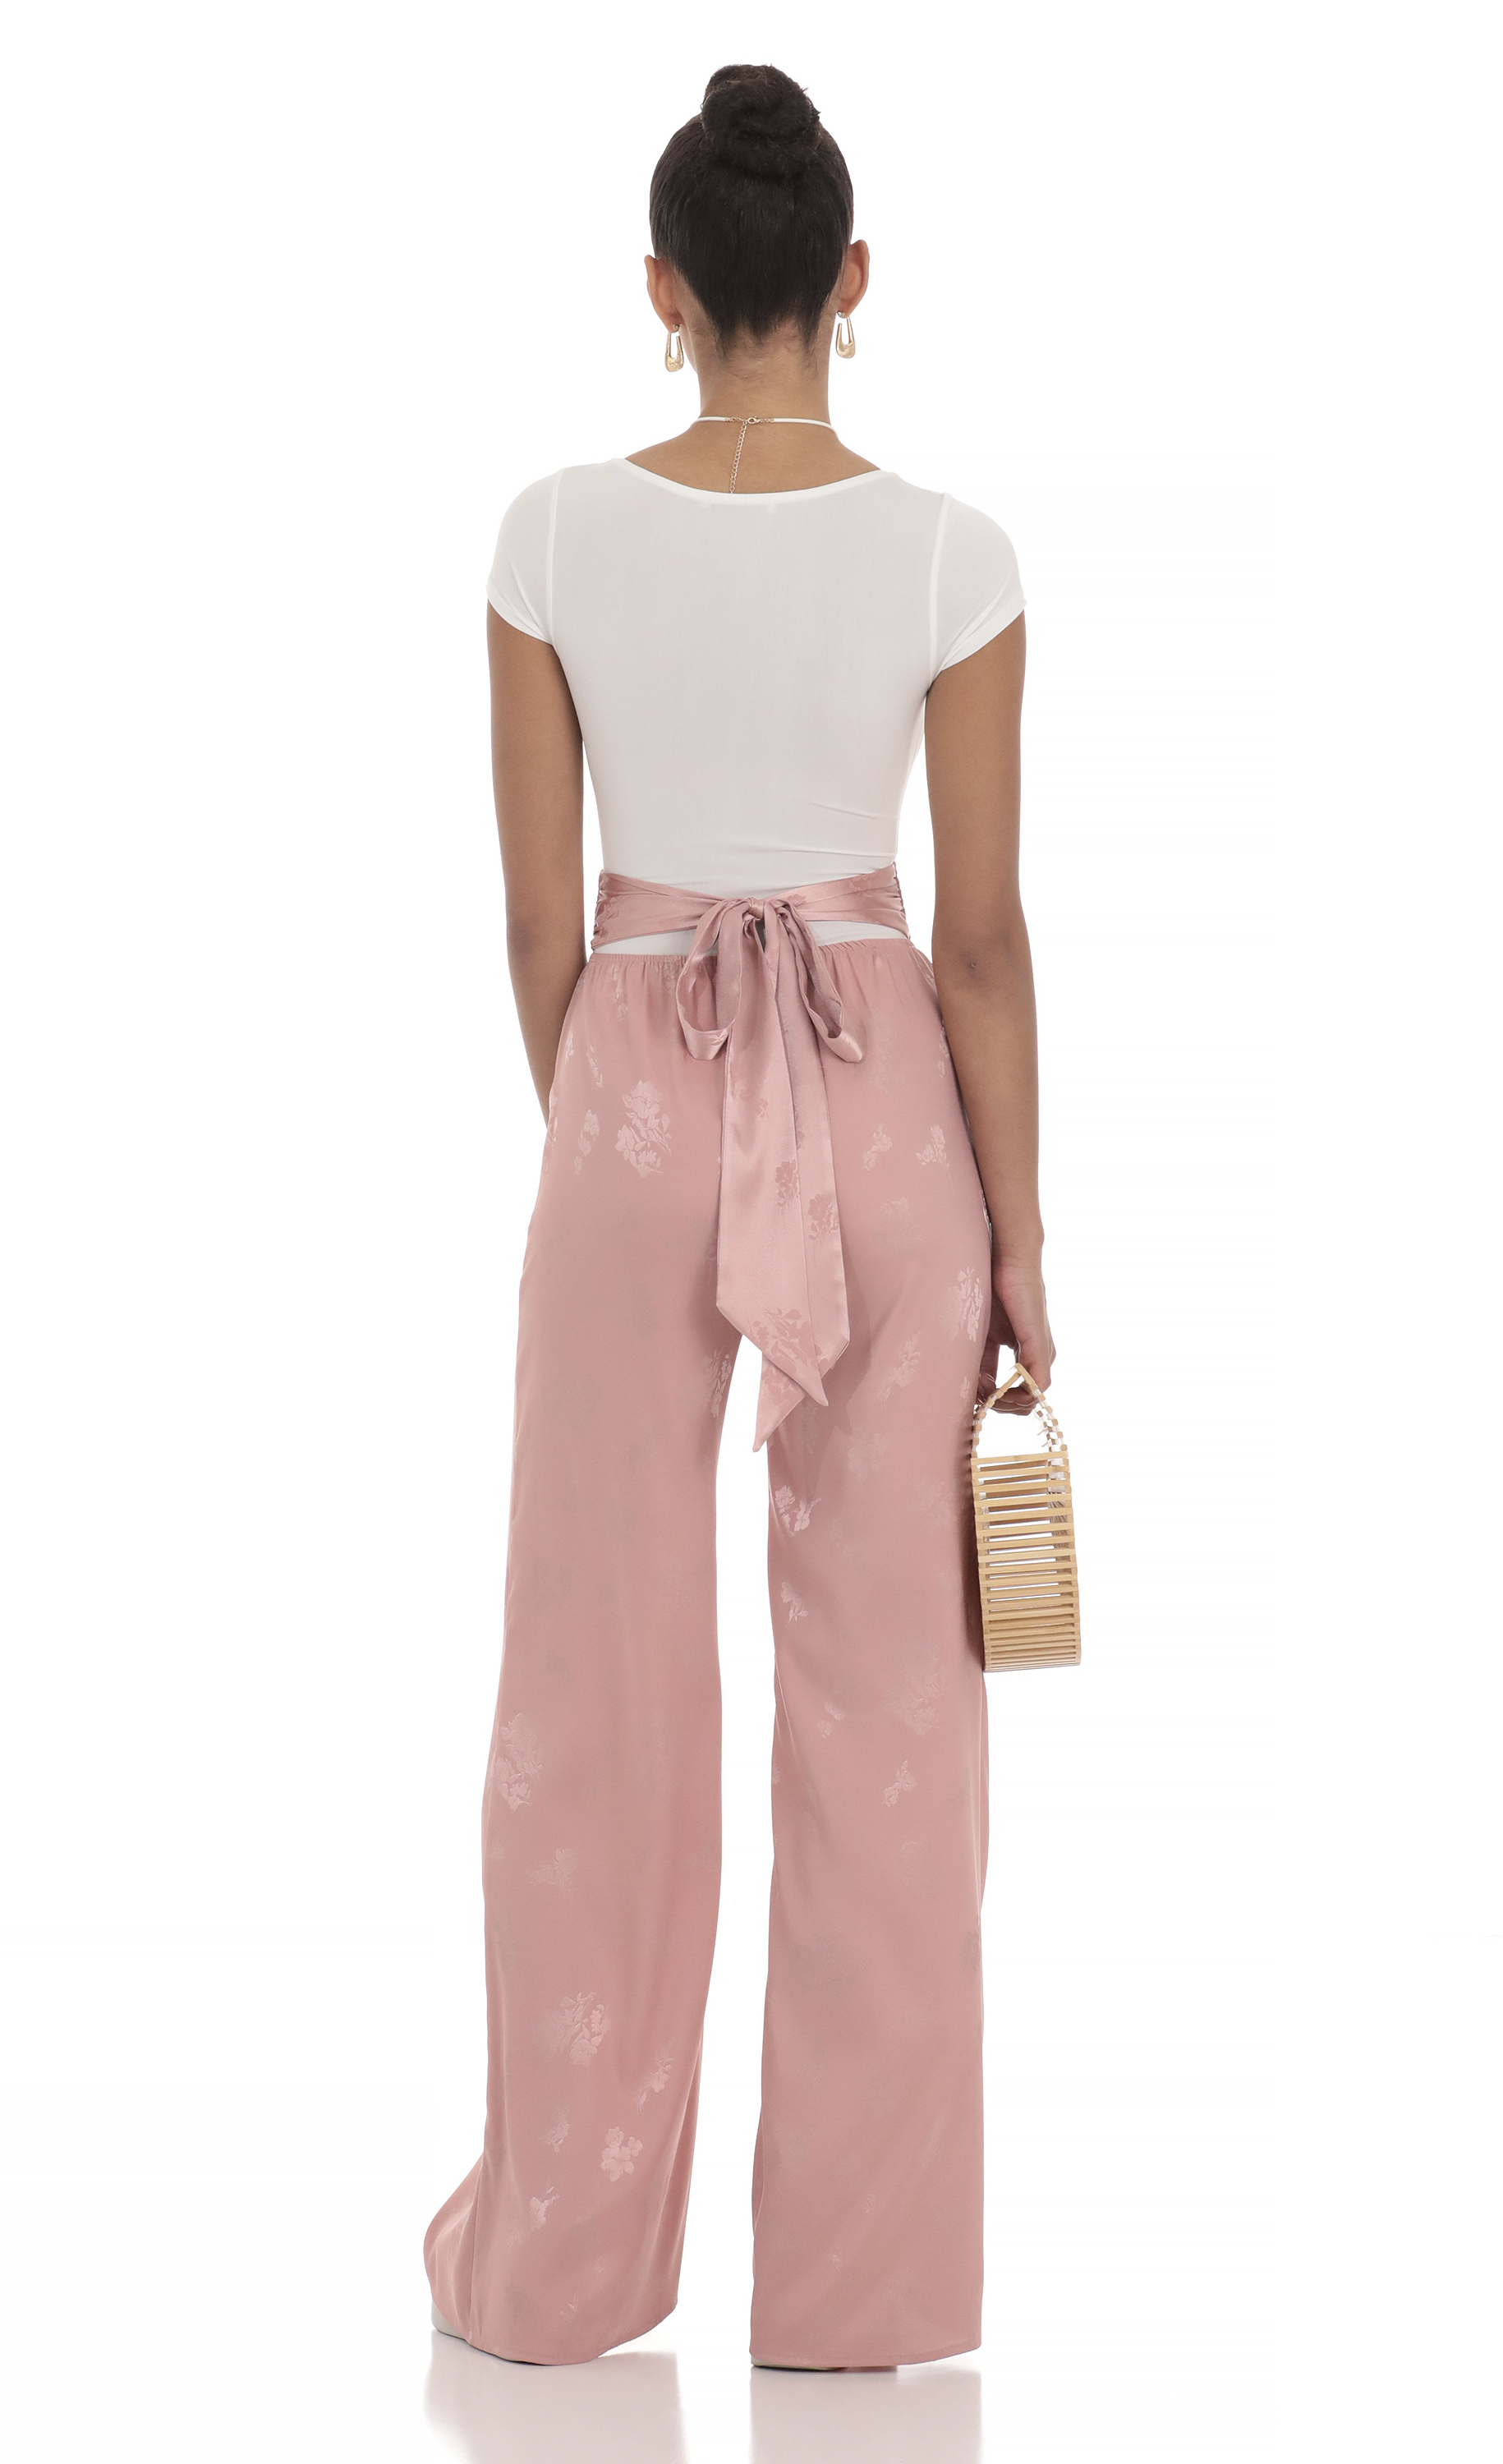 High Waisted Jacquard Pants in Blush Pink